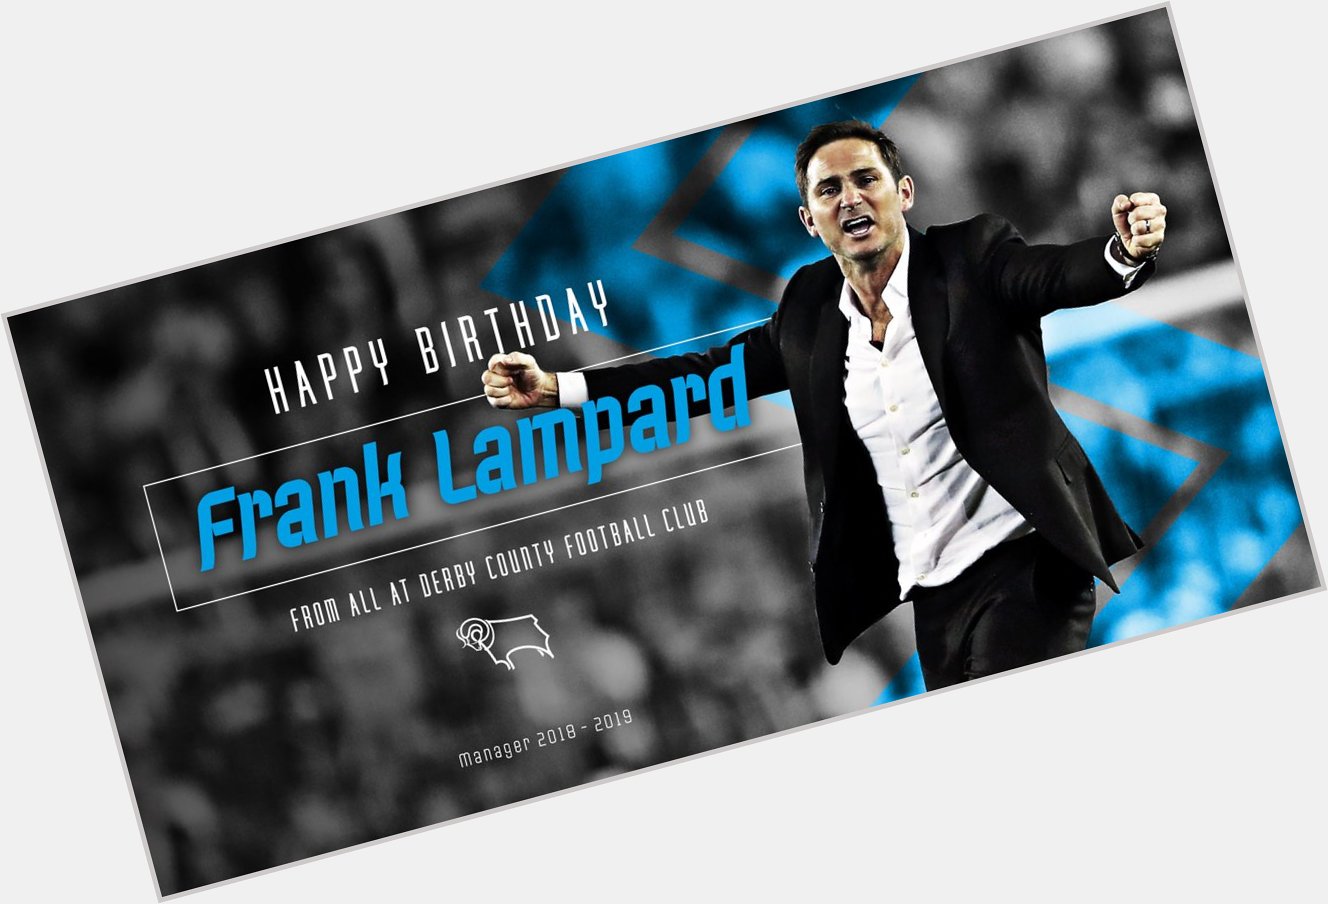 Happy birthday to our former manager, Frank Lampard! 